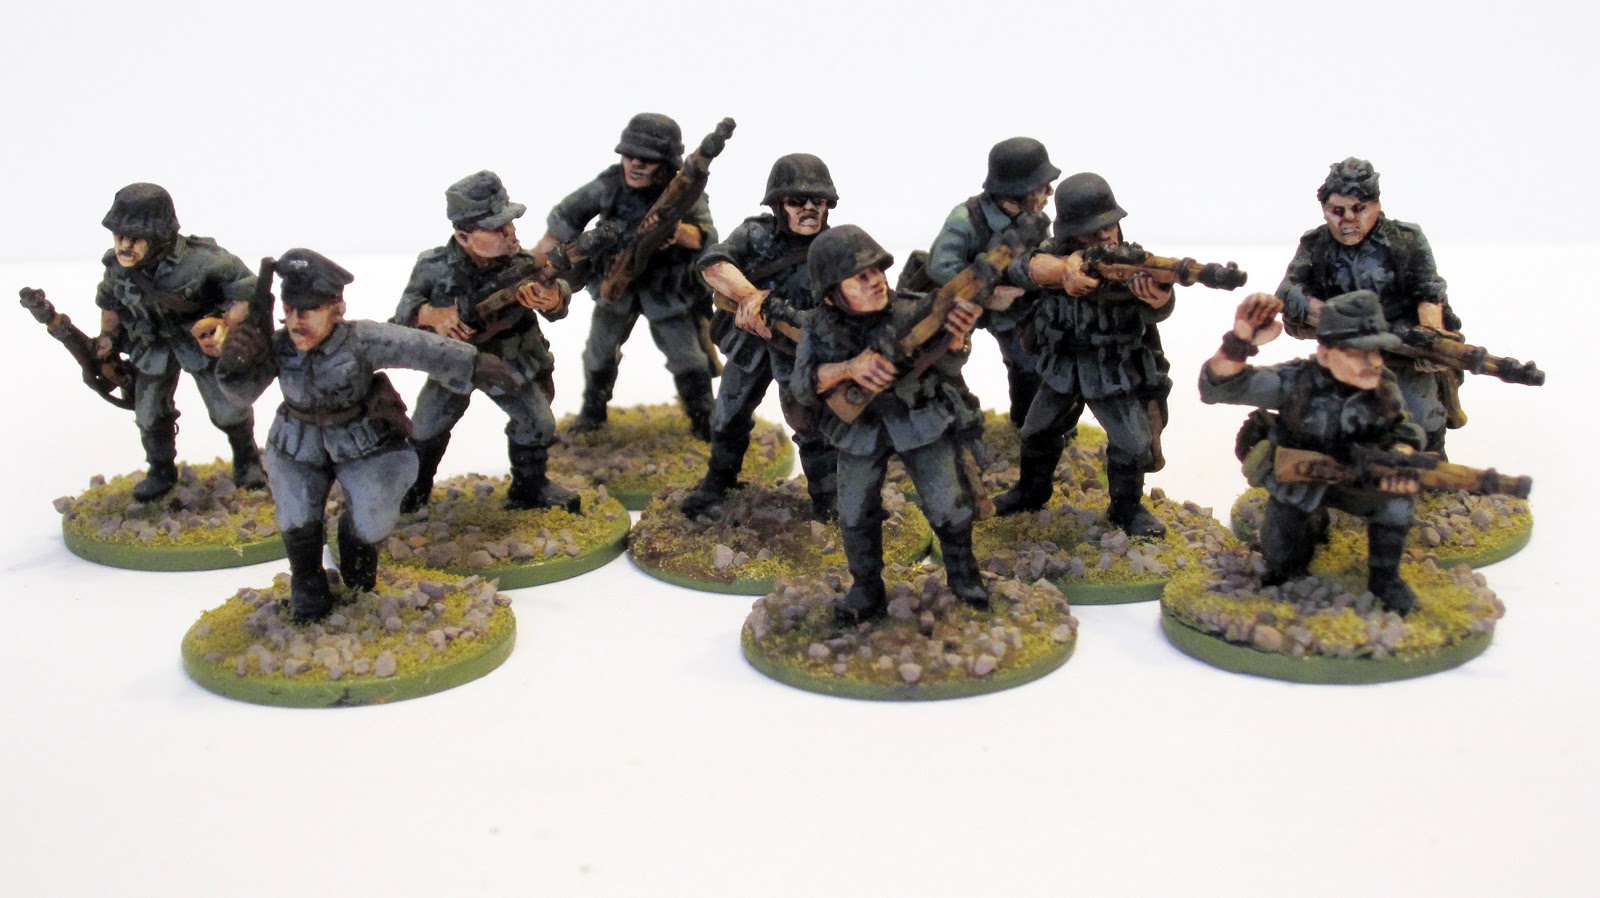 Foundry (I think) 28mm WWII Germans.